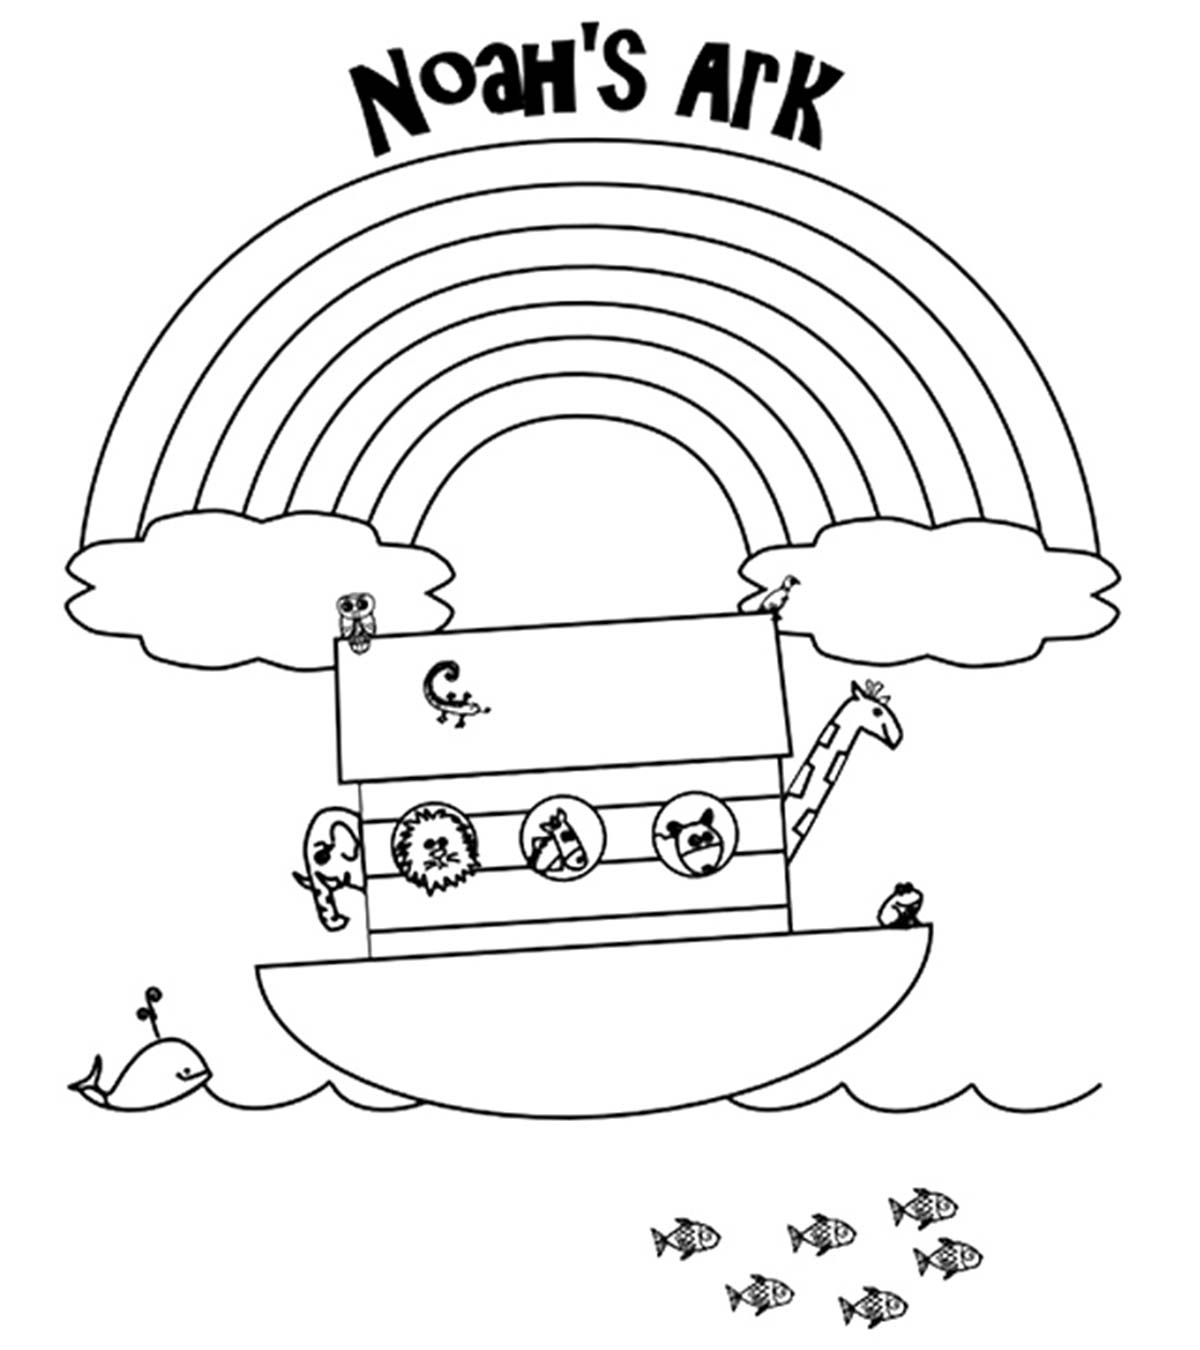 Top 10 'Noah And The Ark' Coloring Pages Your Toddler Will Love To Color